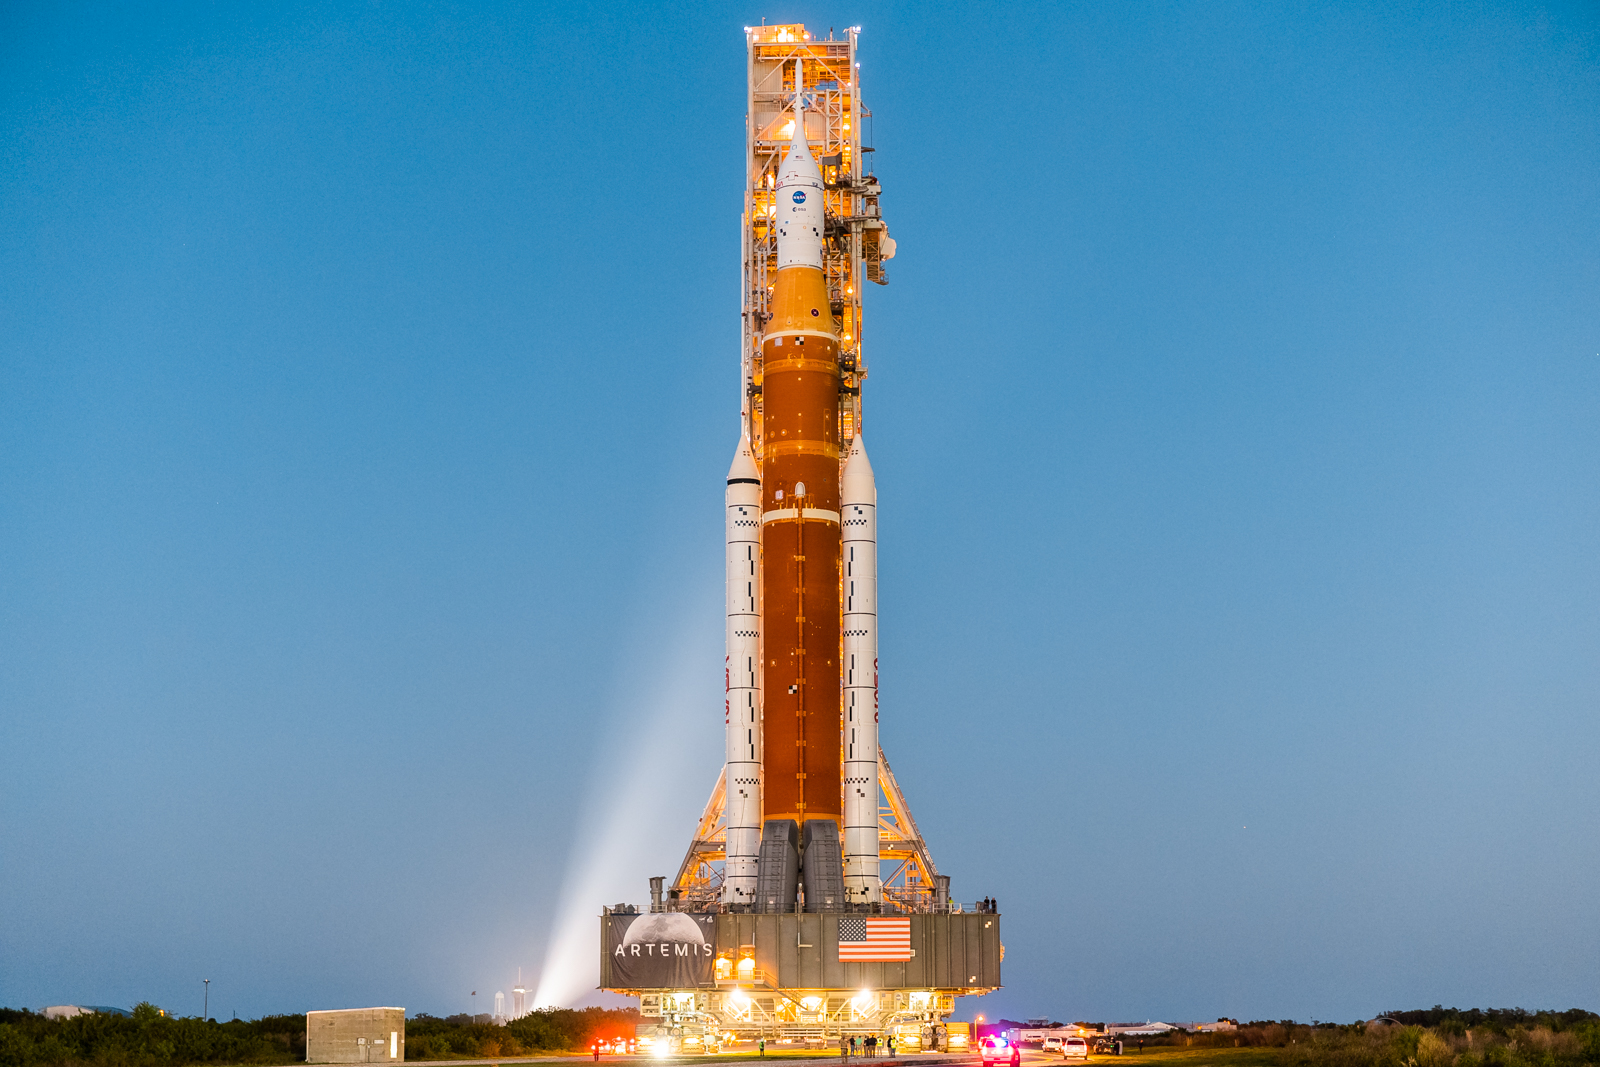 NASA's SLS rocket and Orion spacecraft receive new equipment for the Artemis II manned mission